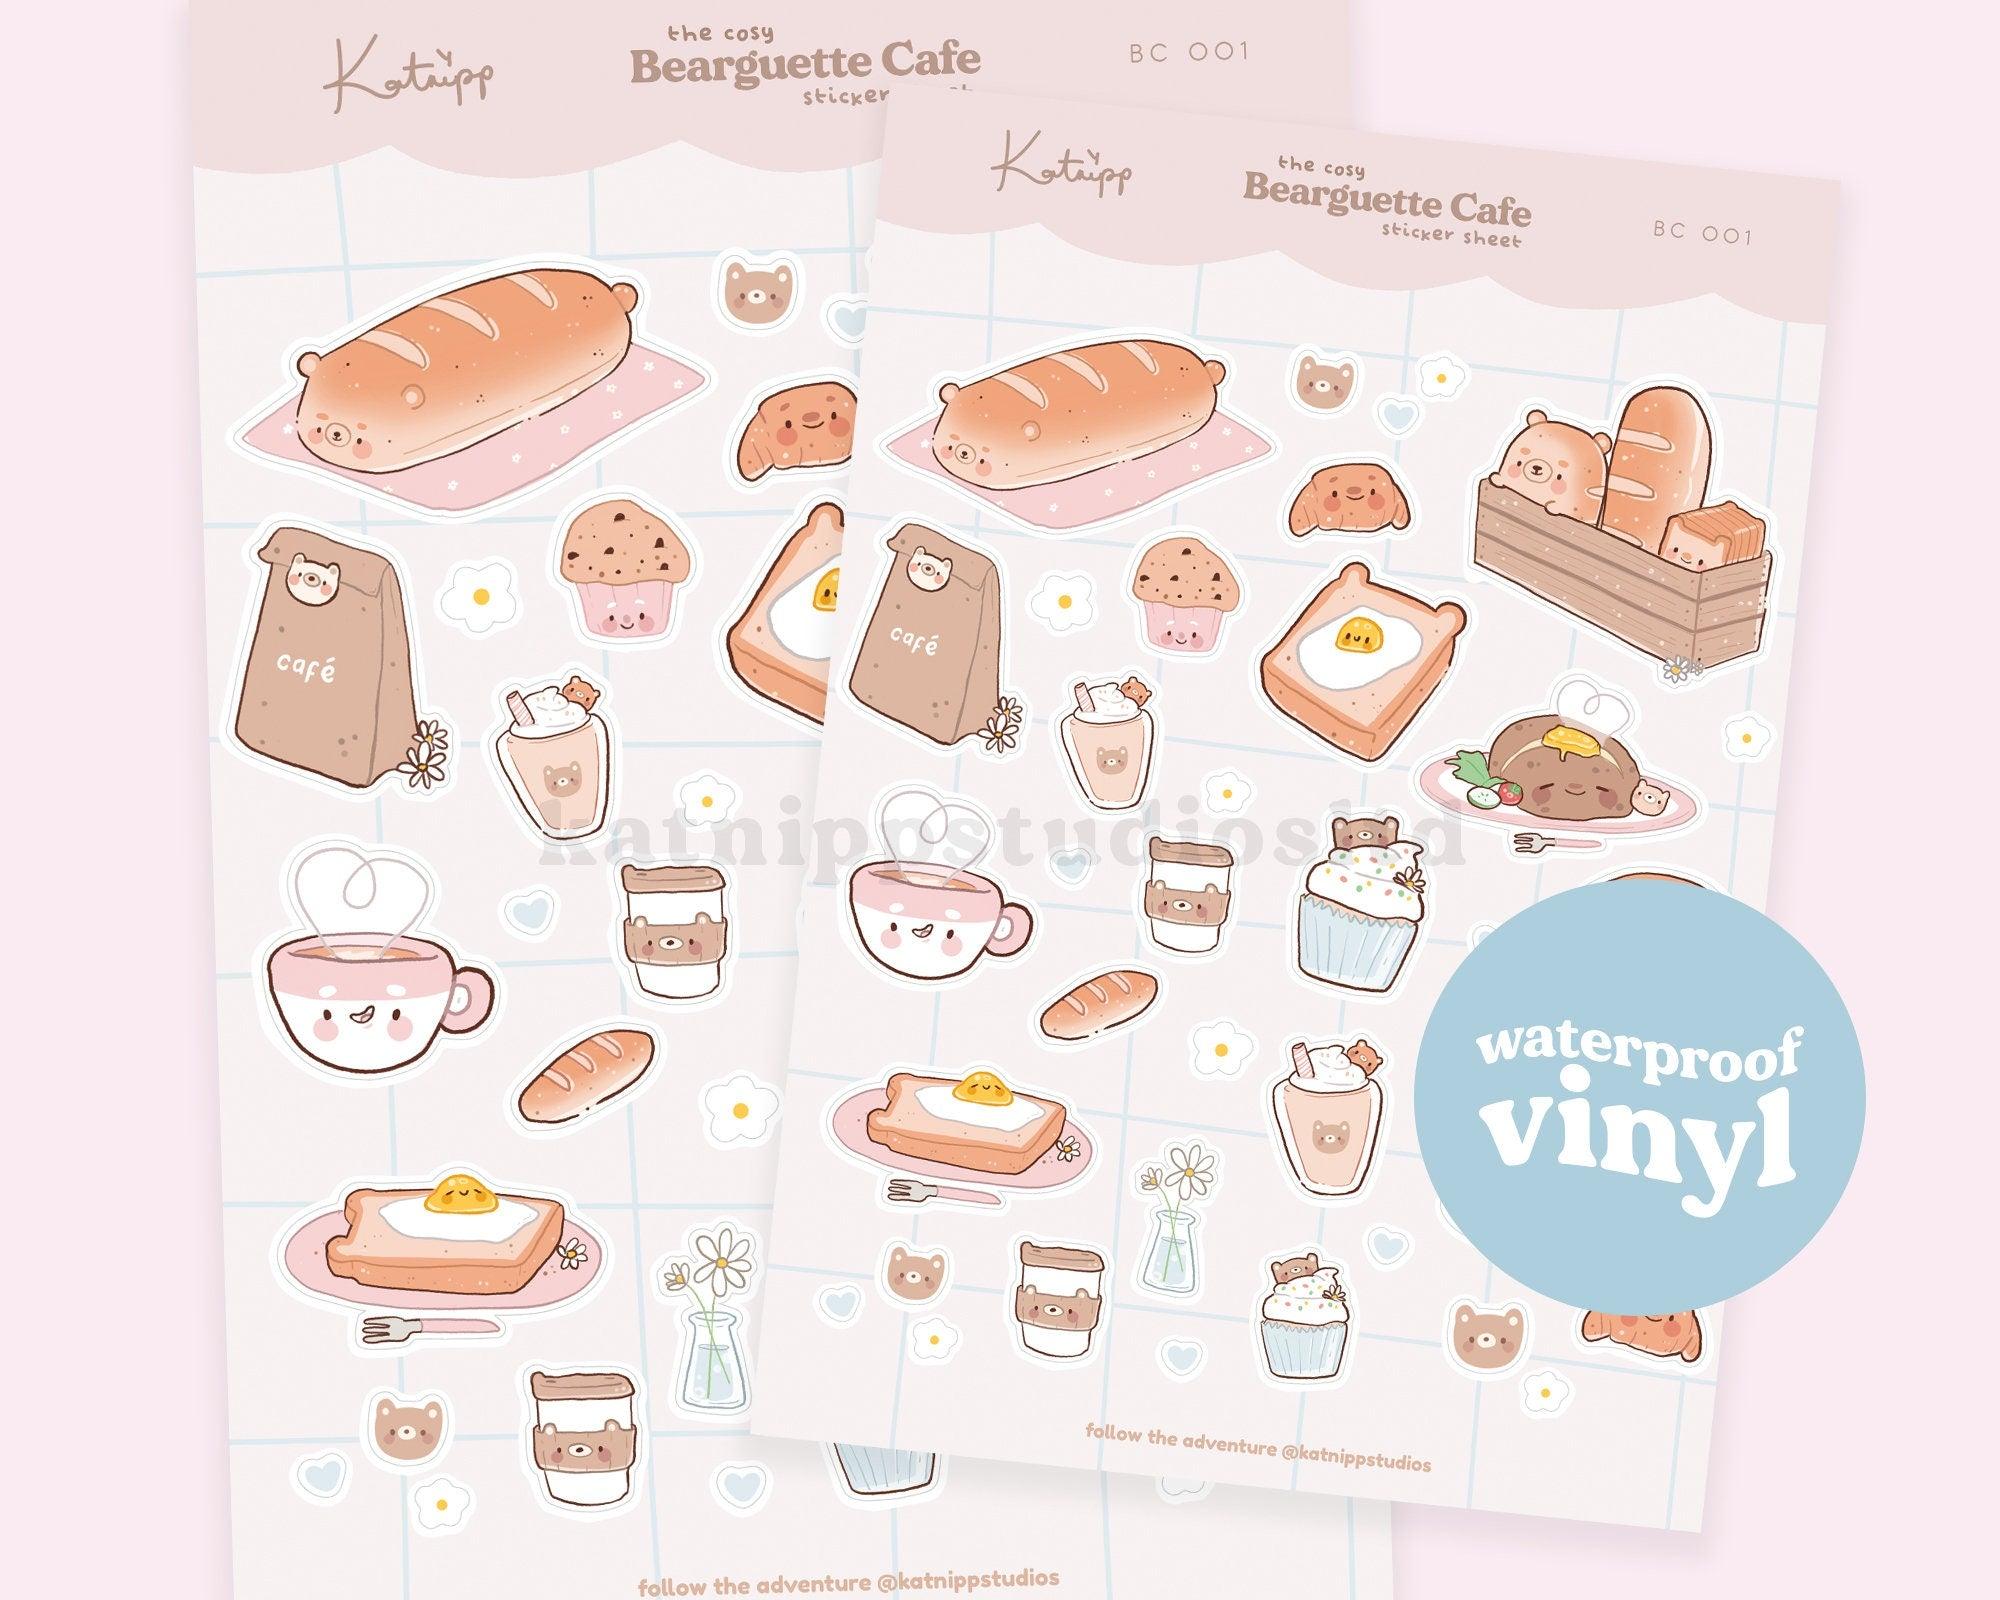 Adorable Bearguette Cafe Bakery Waterproof Vinyl Stickers featuring bakery, cafe, and barista designs, perfect for planners, laptops, and more.